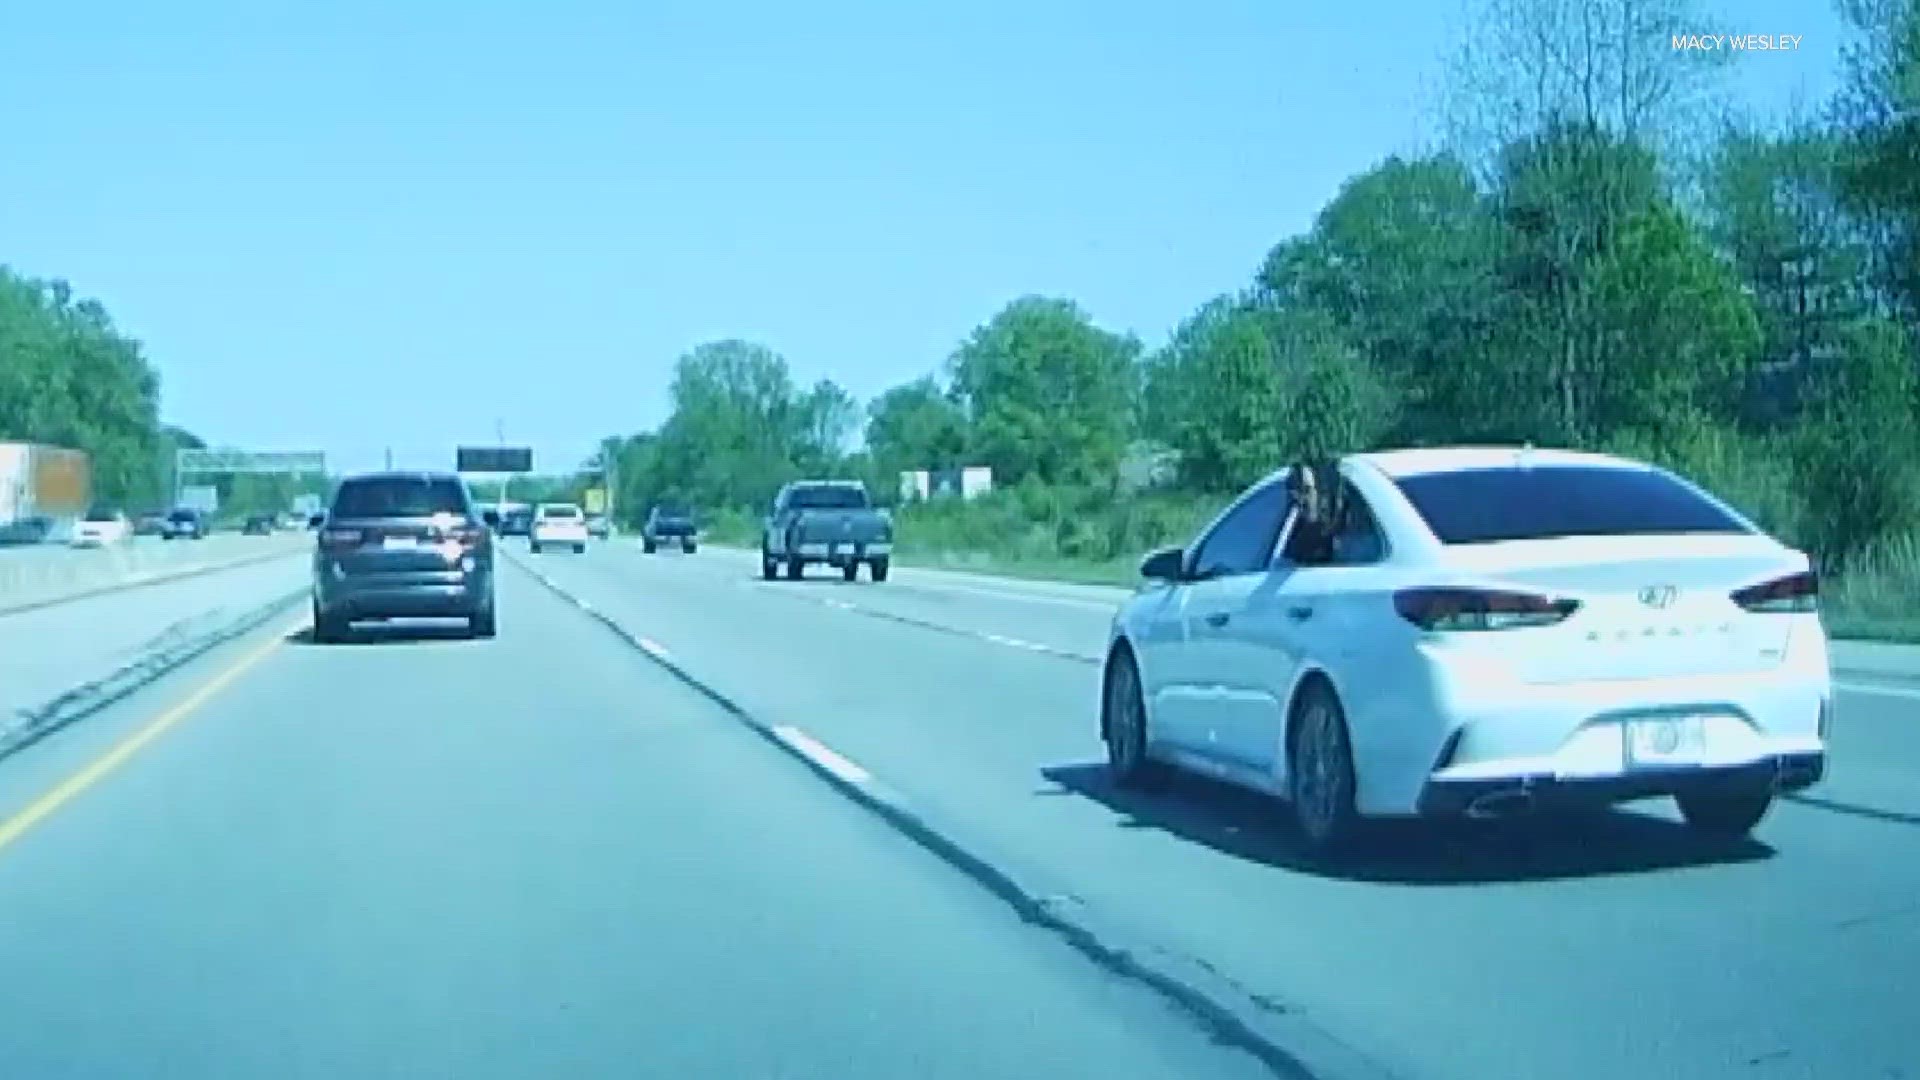 Frightening moments for a driver who caught this scene on her dash cam.